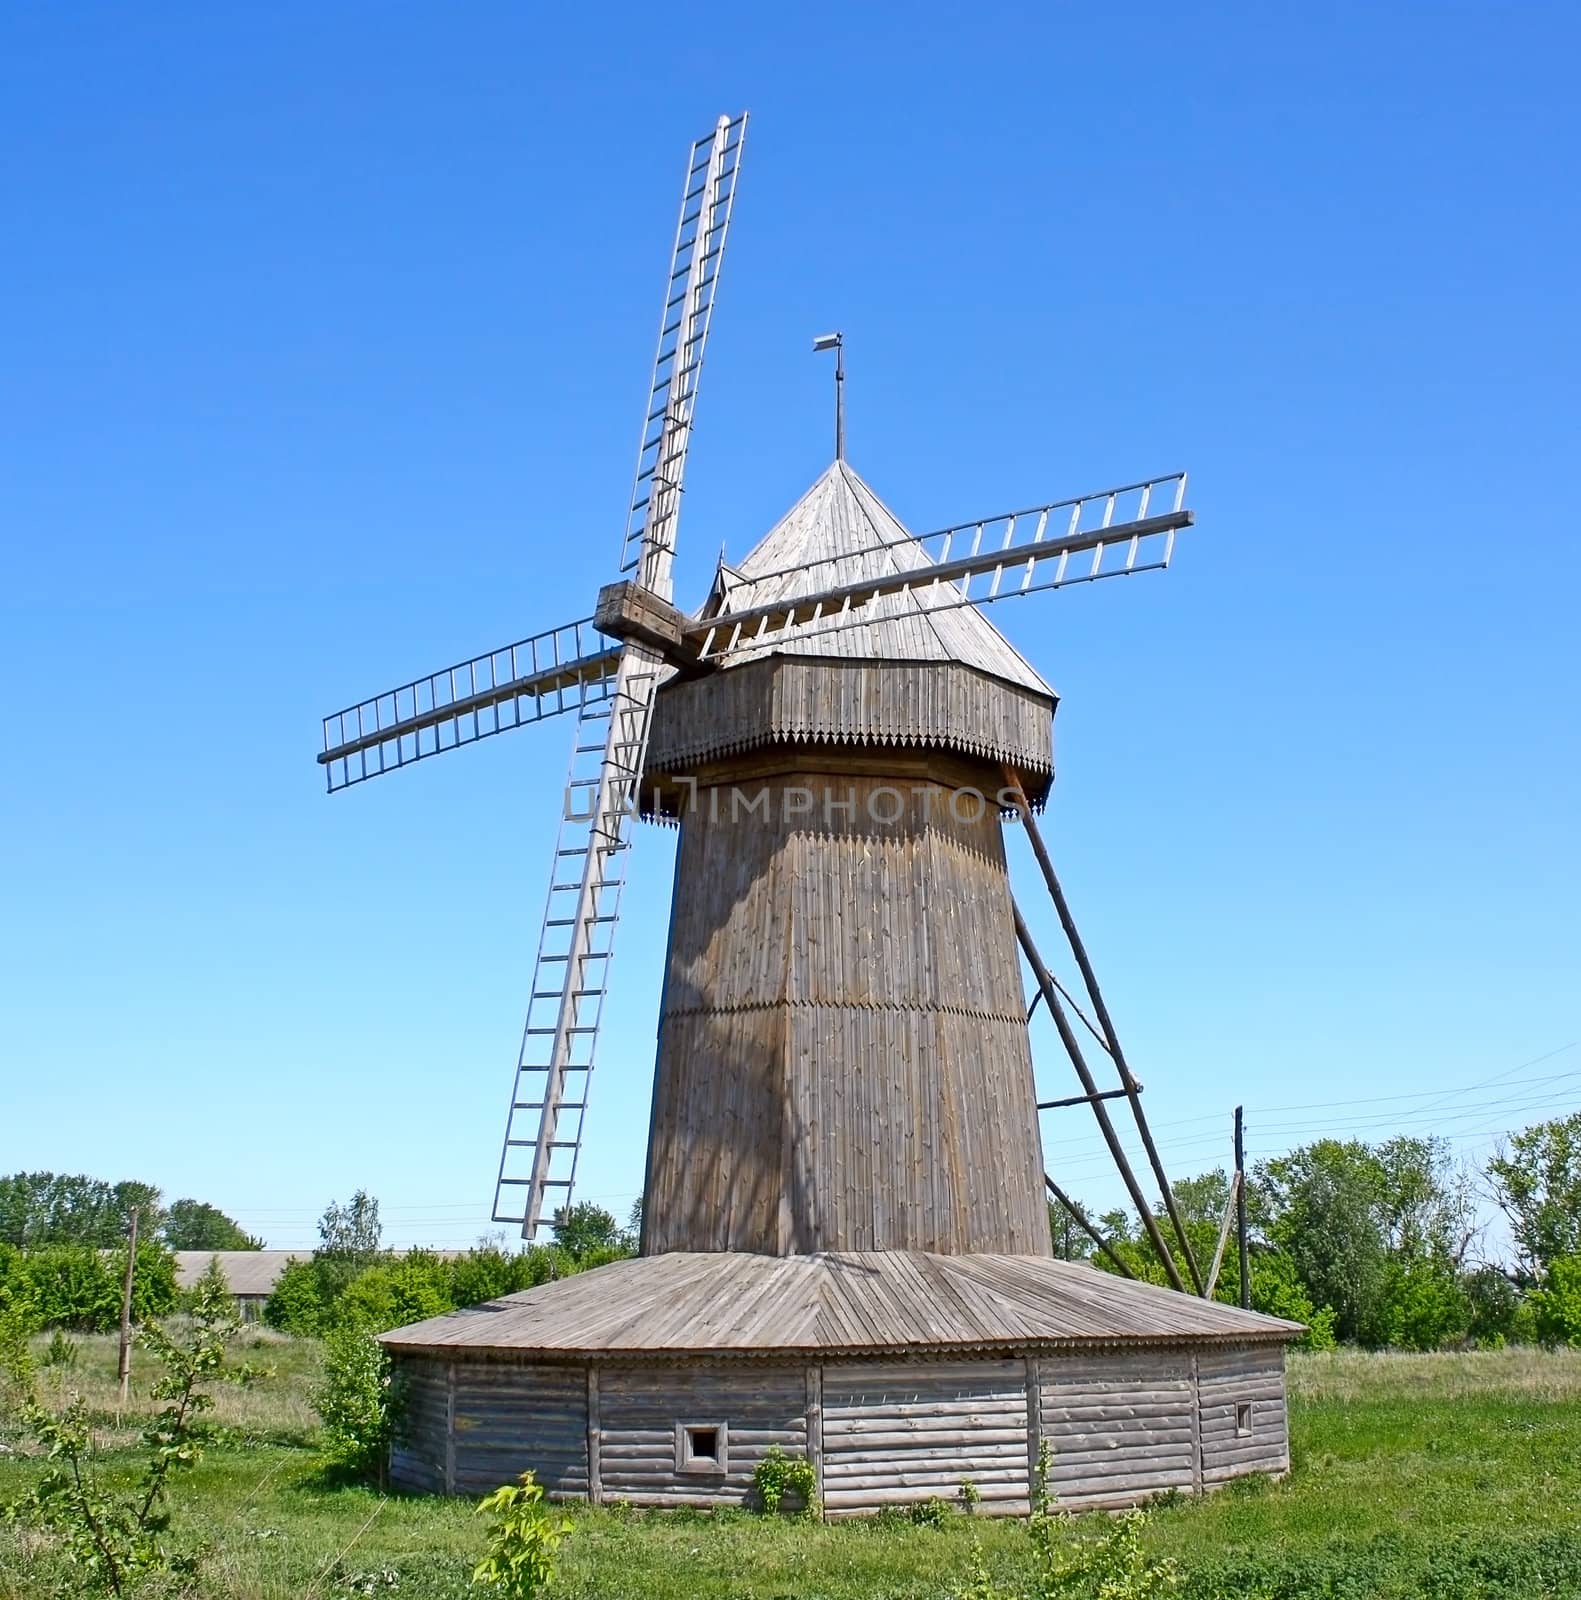 On the green grass, the wooden windmill against the blue sky.